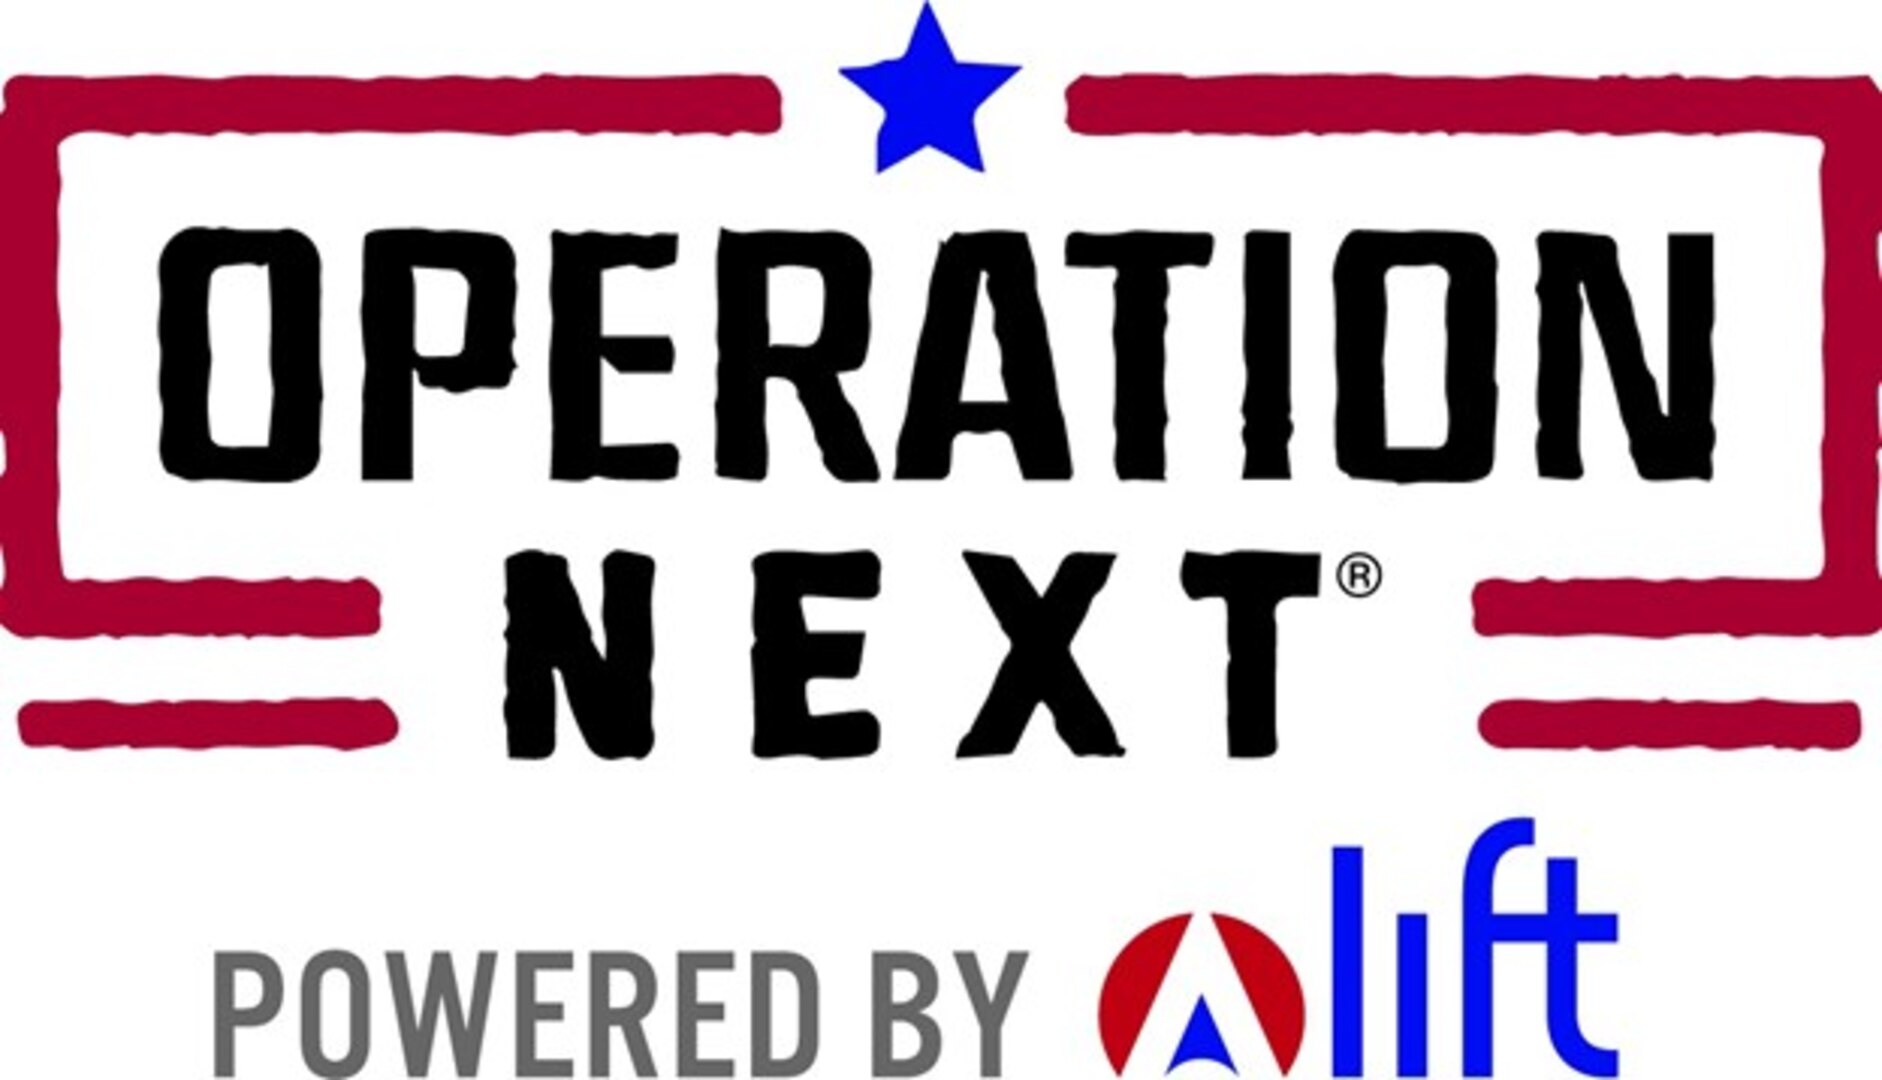 LIFT, one of nine Department of Defense Manufacturing Innovation Institutes, logo for the education and workforce development program Operation Next.